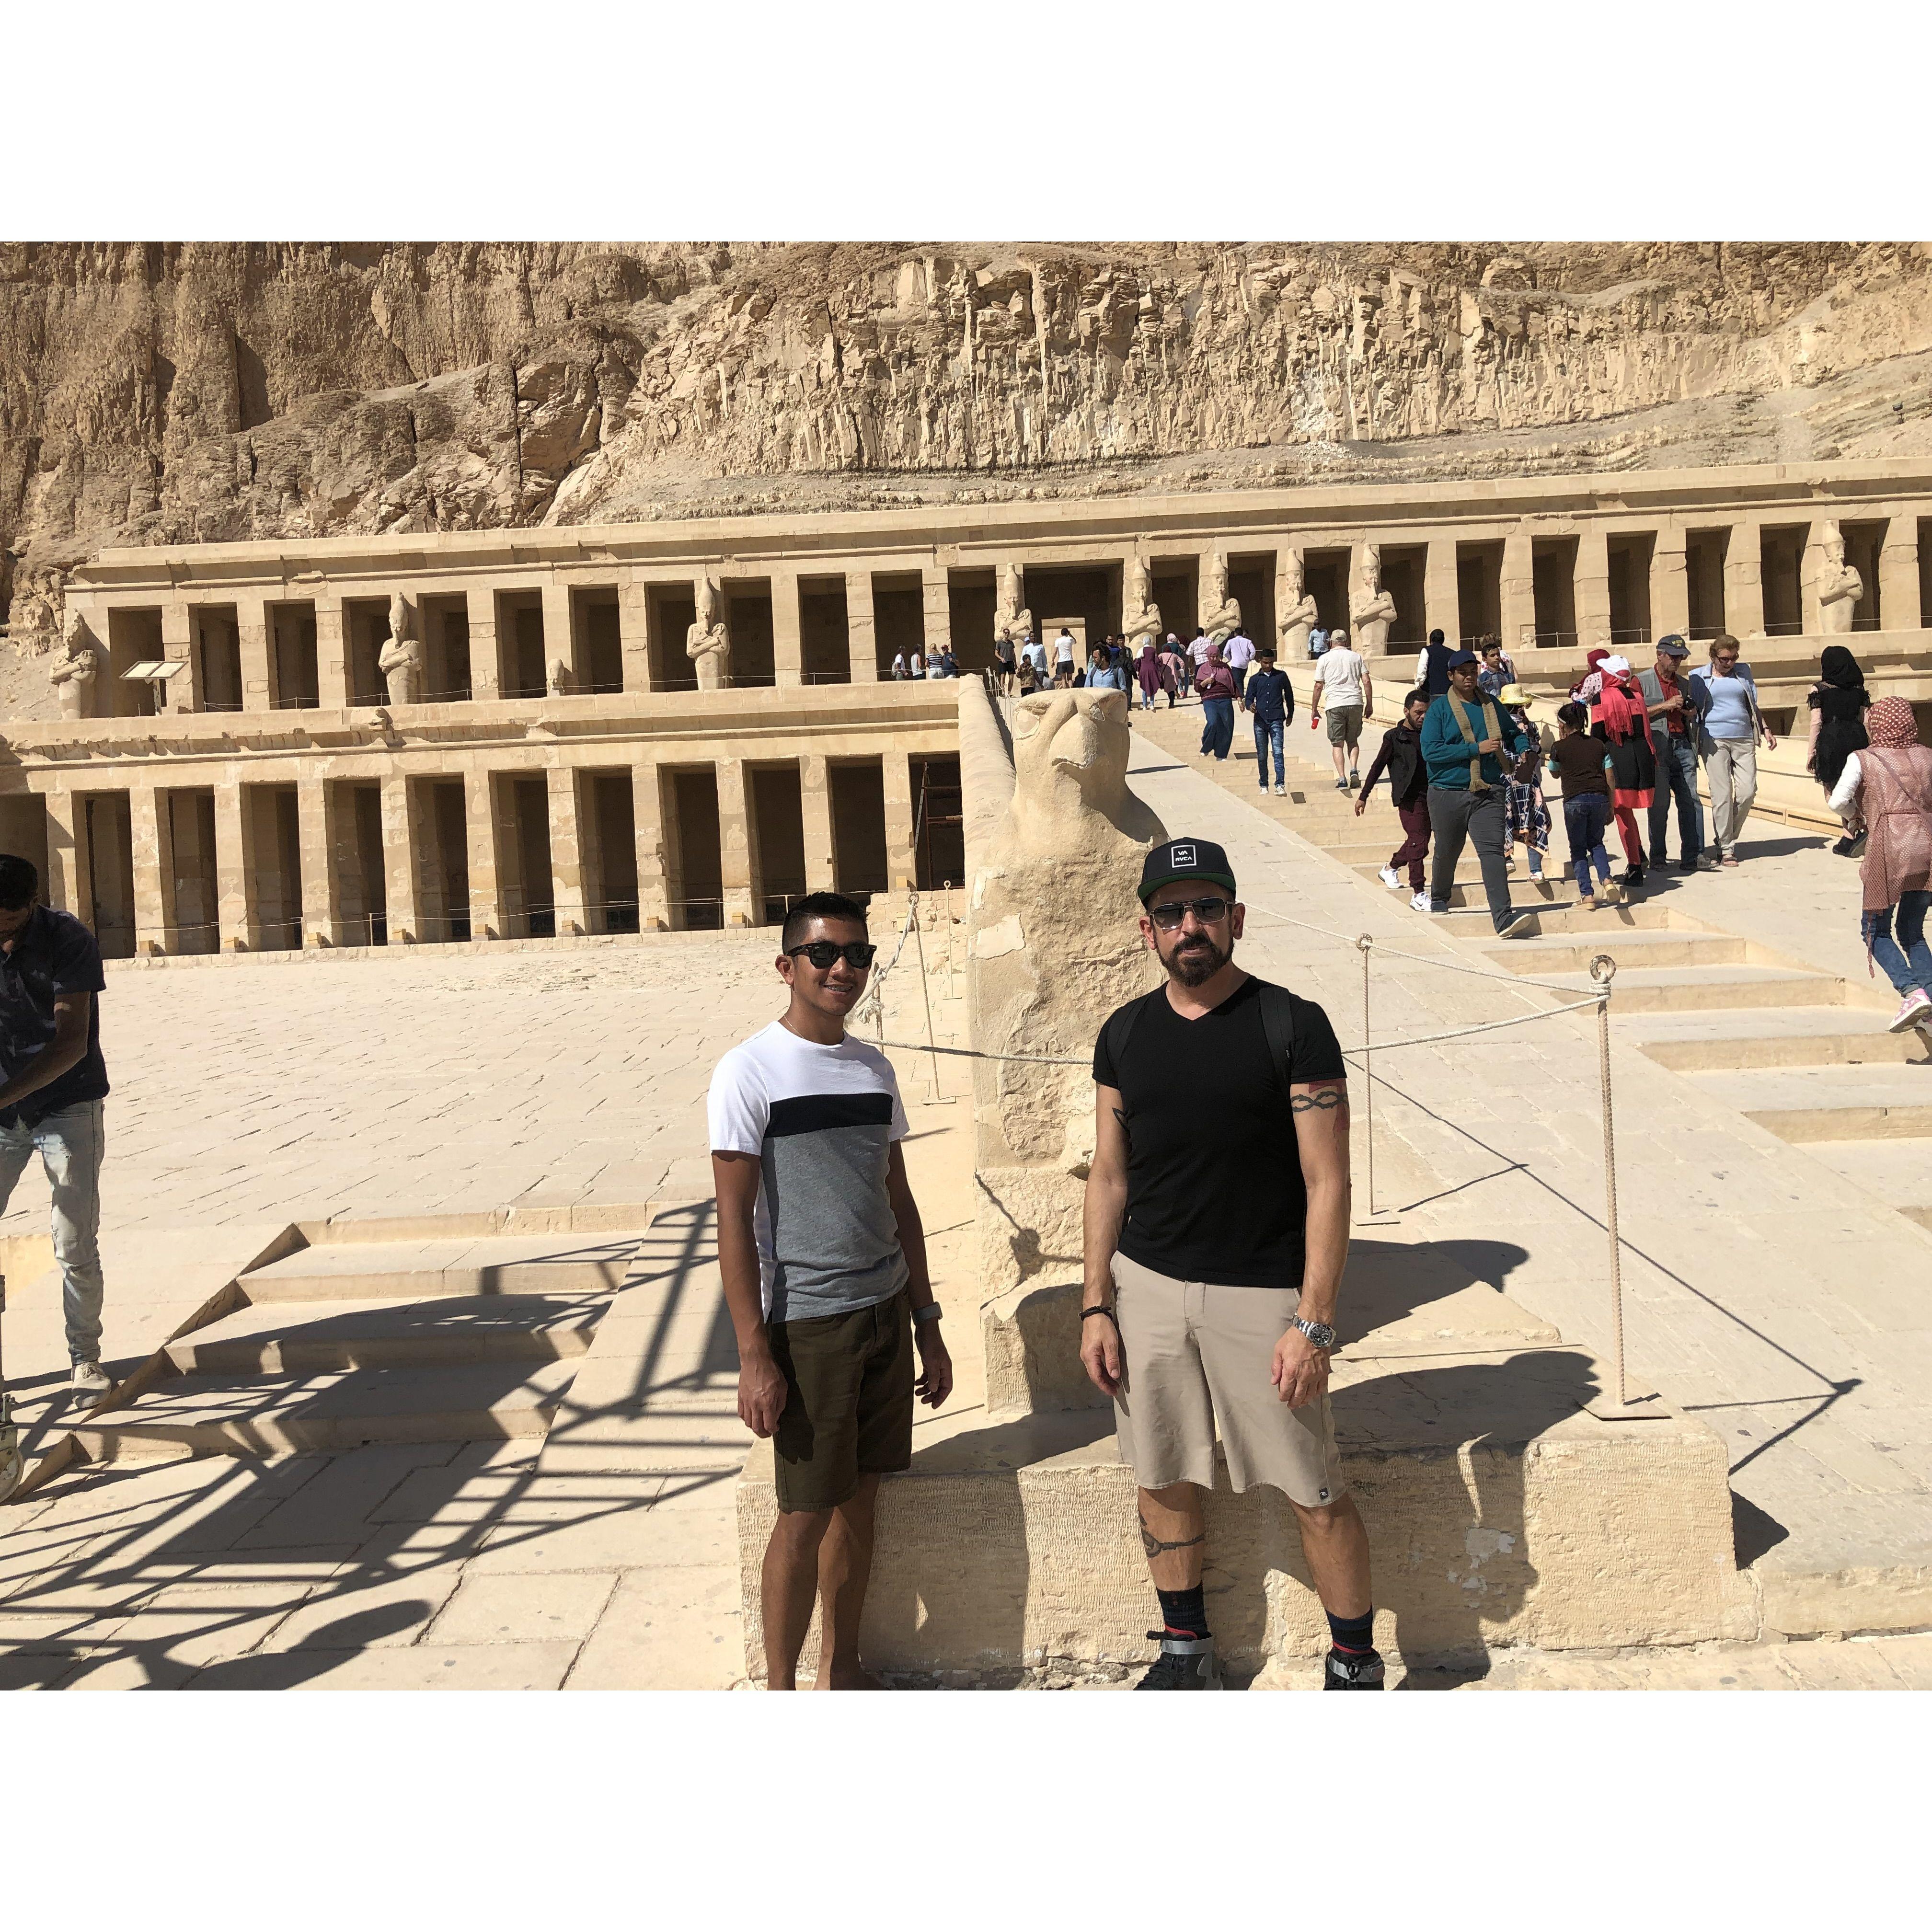 Going through the Valley of the Kings and Luxor 2018